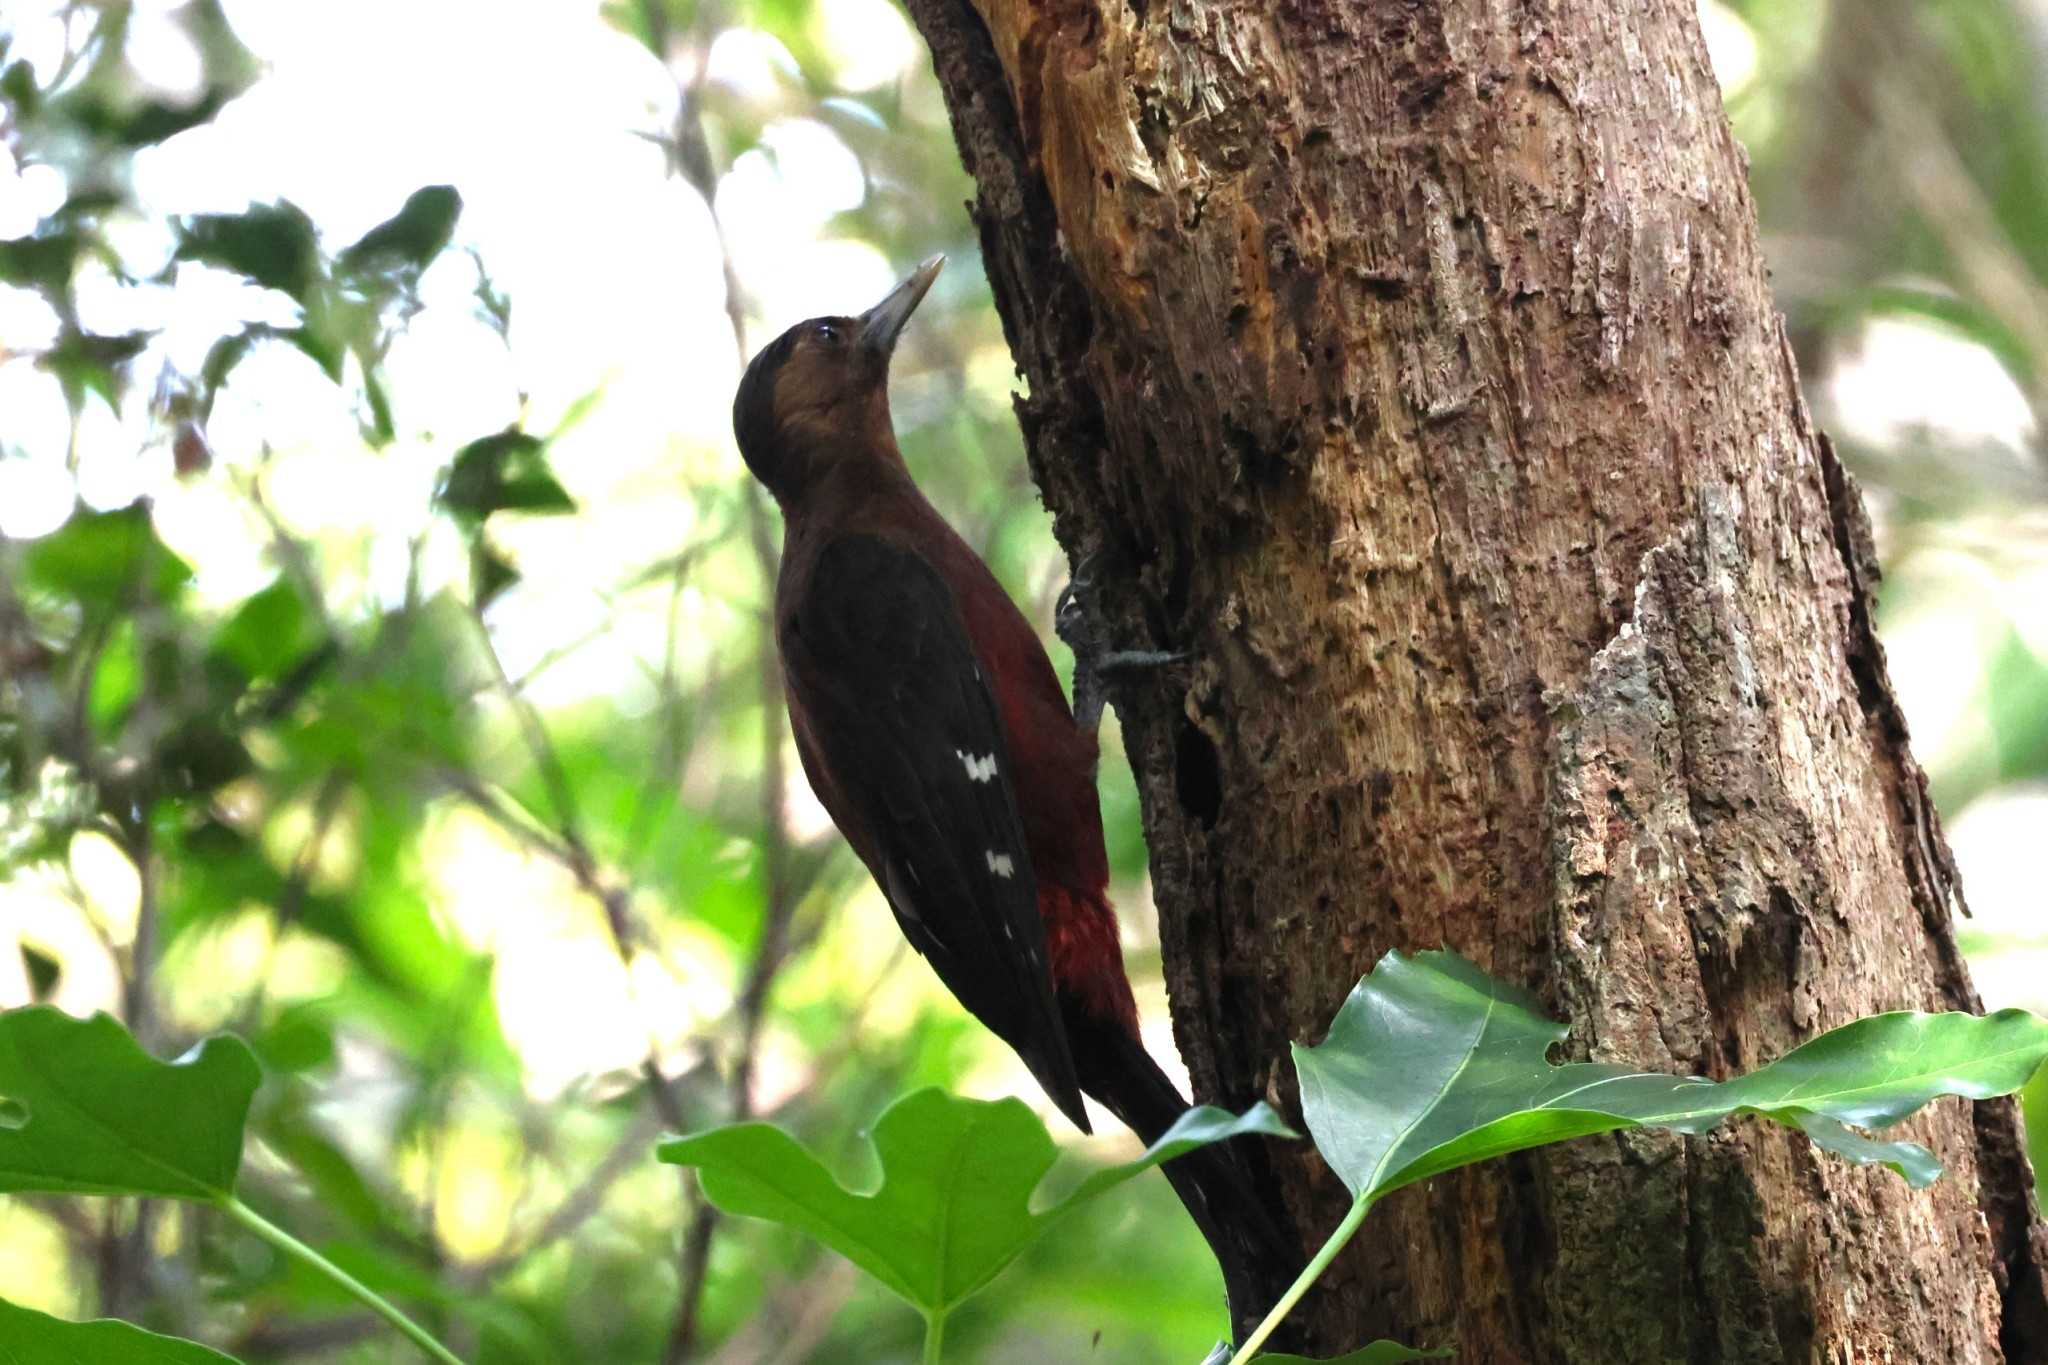 Photo of Okinawa Woodpecker at 国頭村森林公園 by ぼぼぼ